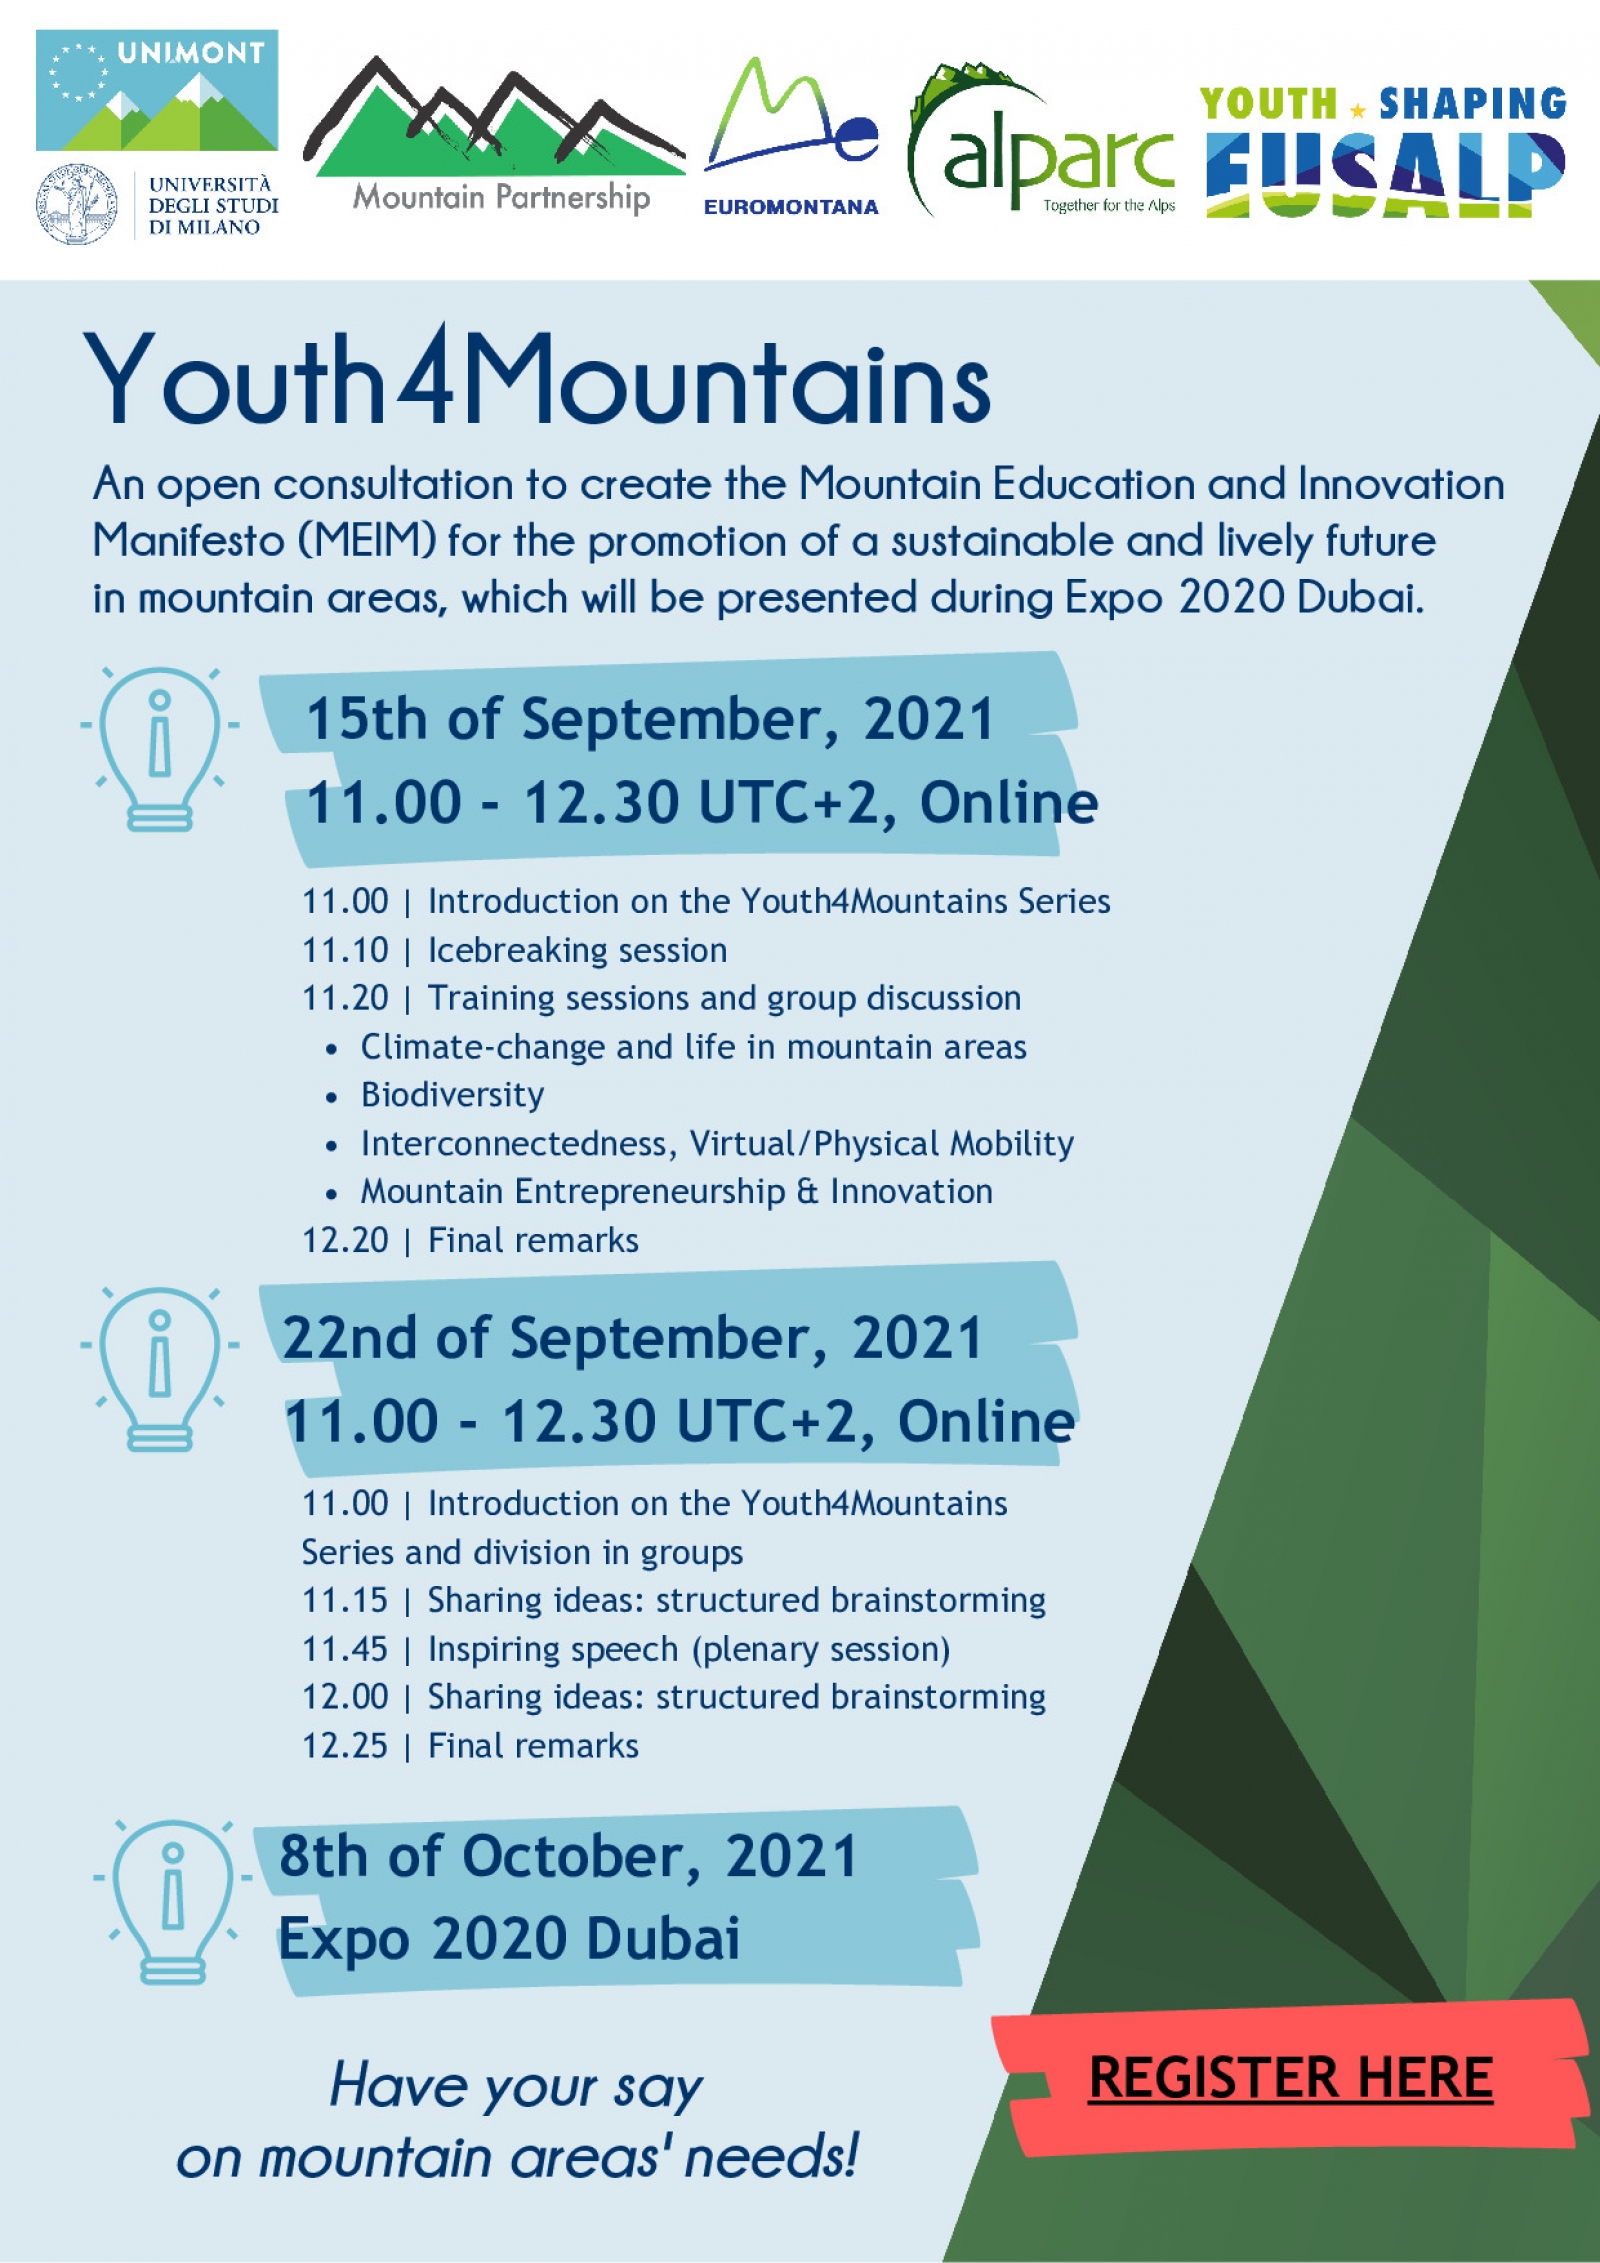 Youth4Mountains